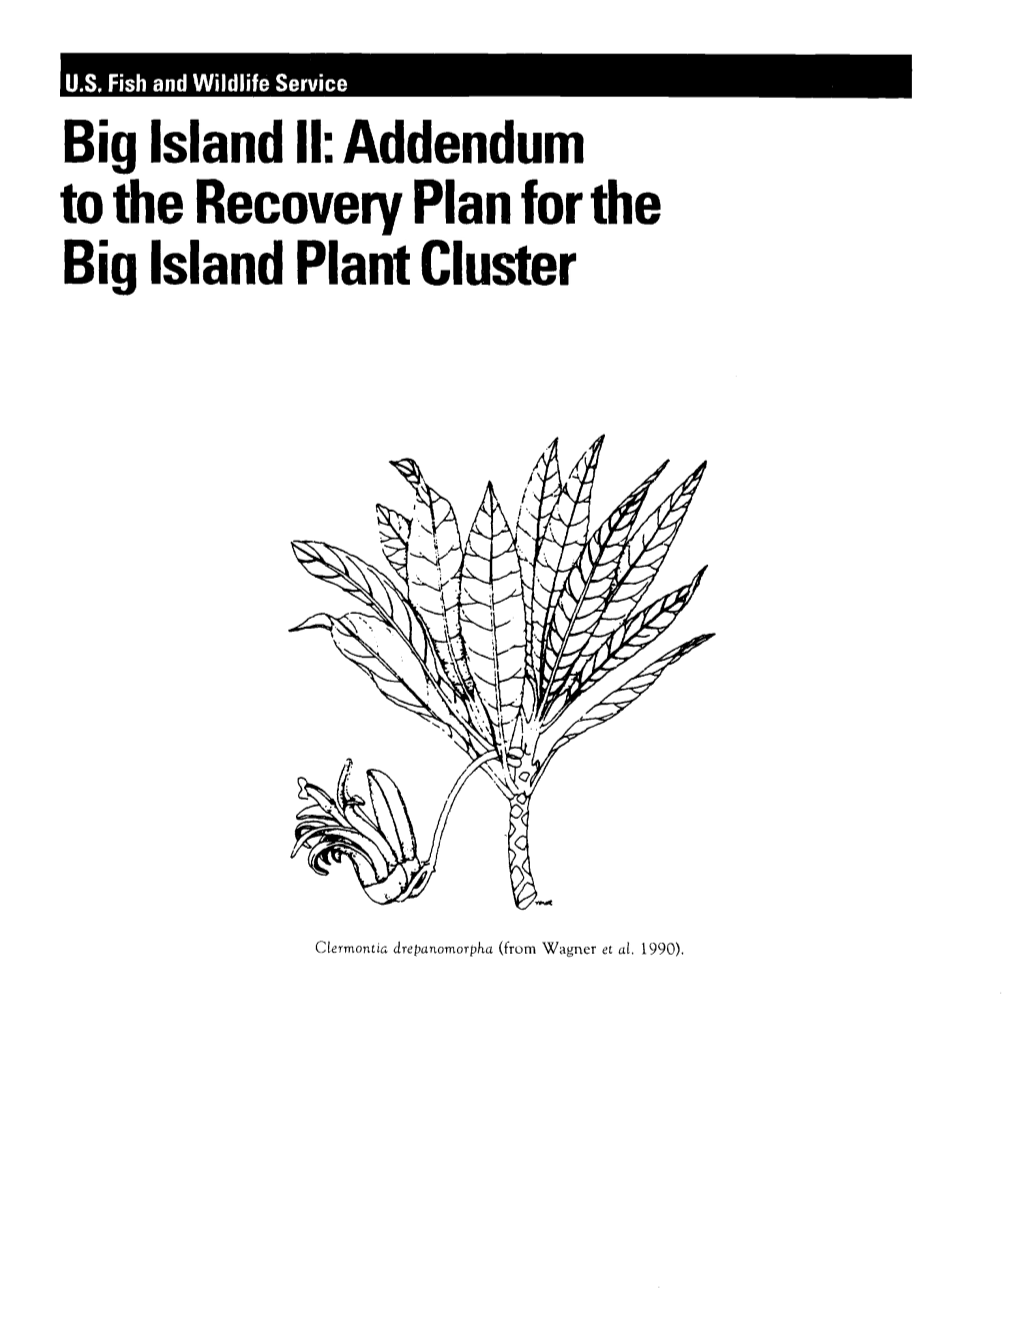 Big Island II: Addendum to the Recovery Plan for the Big Island Plant Cluster